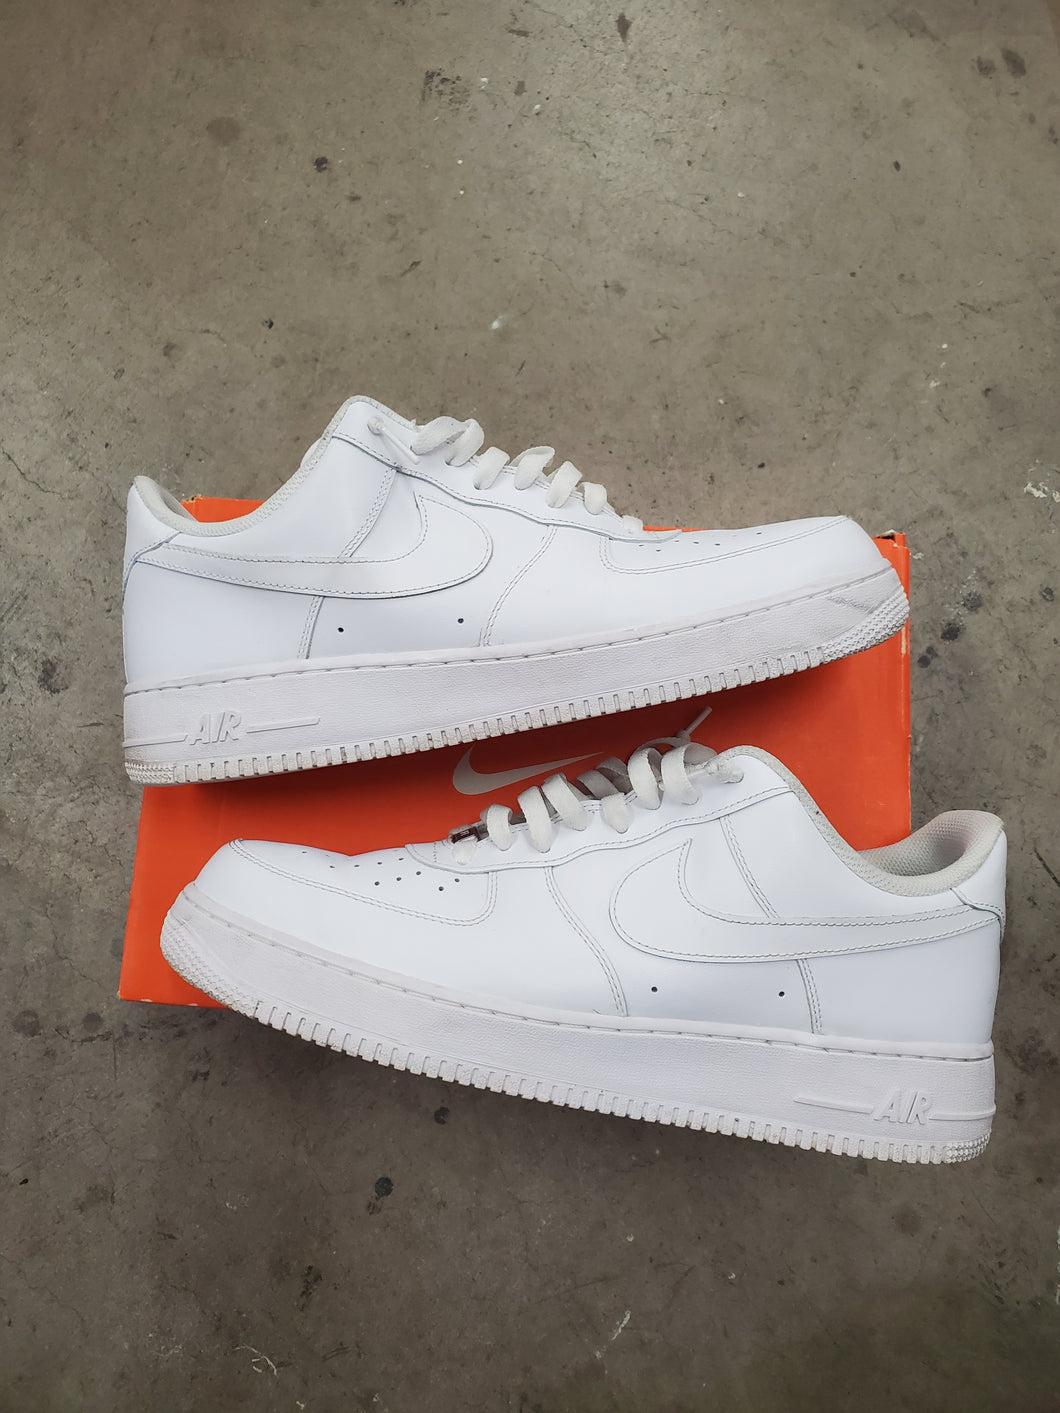 Good Vibes Only AF1 Lows - Custom Order Invoice 1 of 2